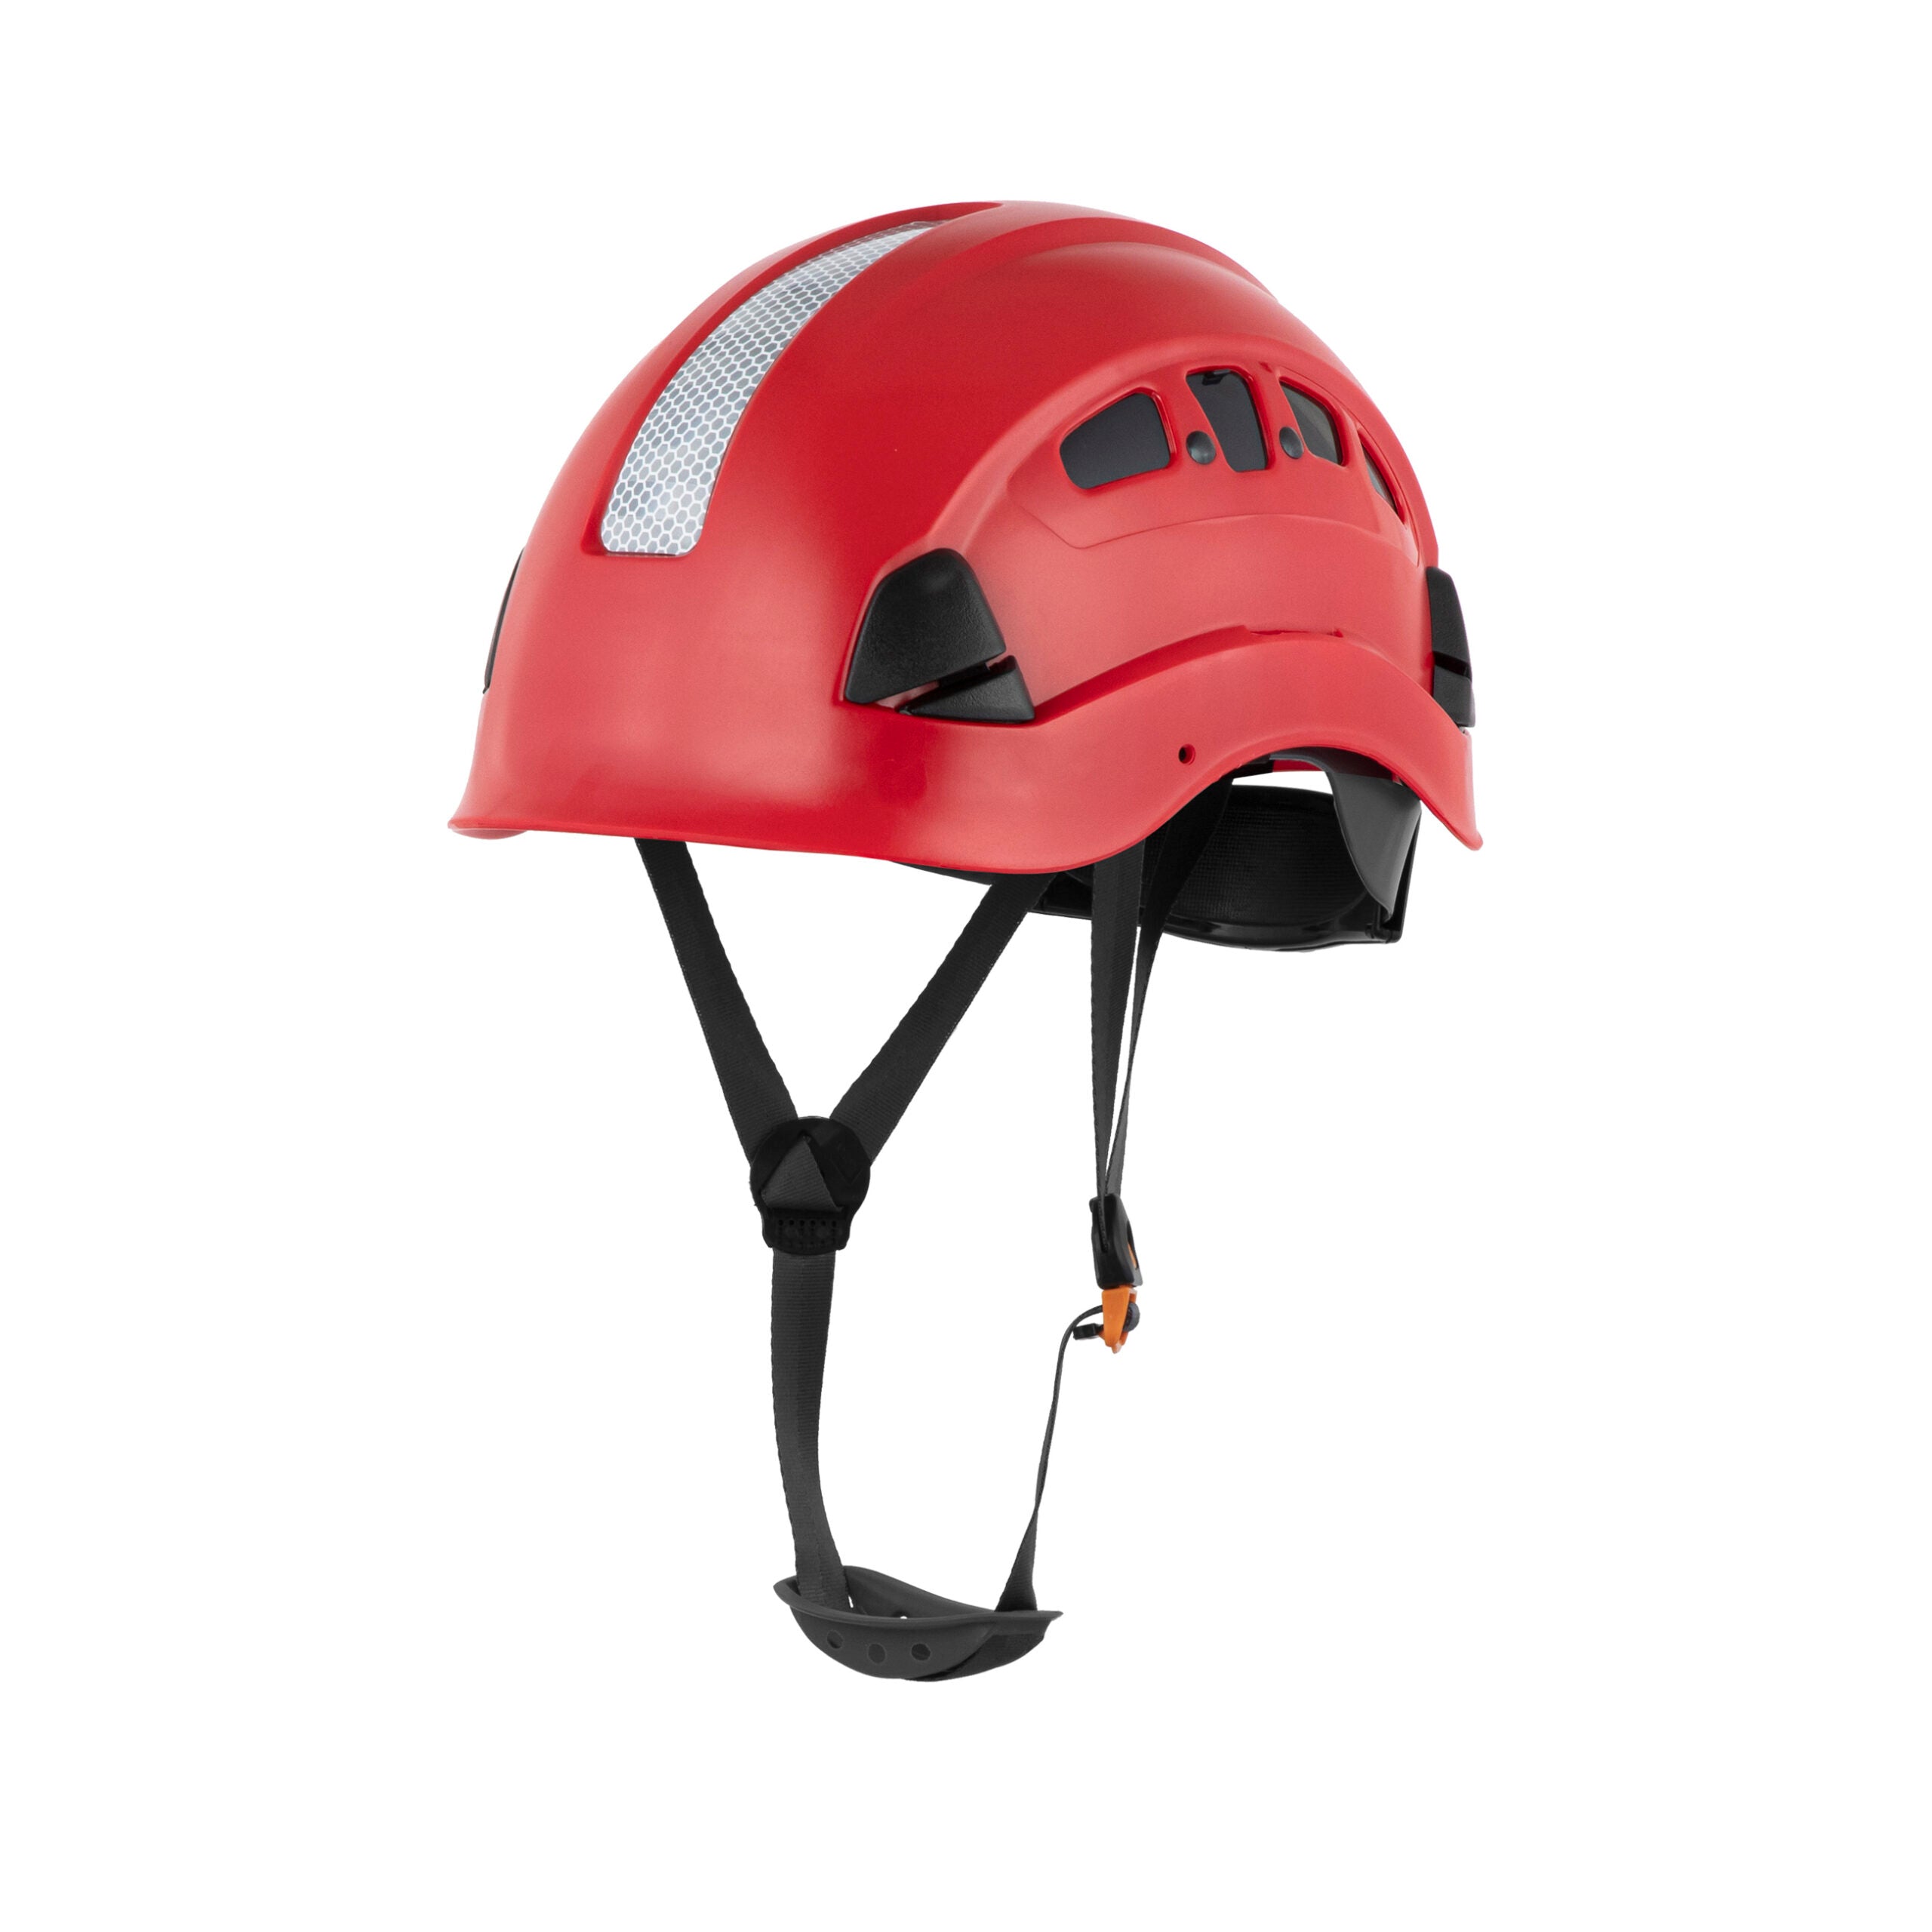 H1-CH Safety Helmet Type 1, Class C, ANSI Z89 & EN 397 Rated